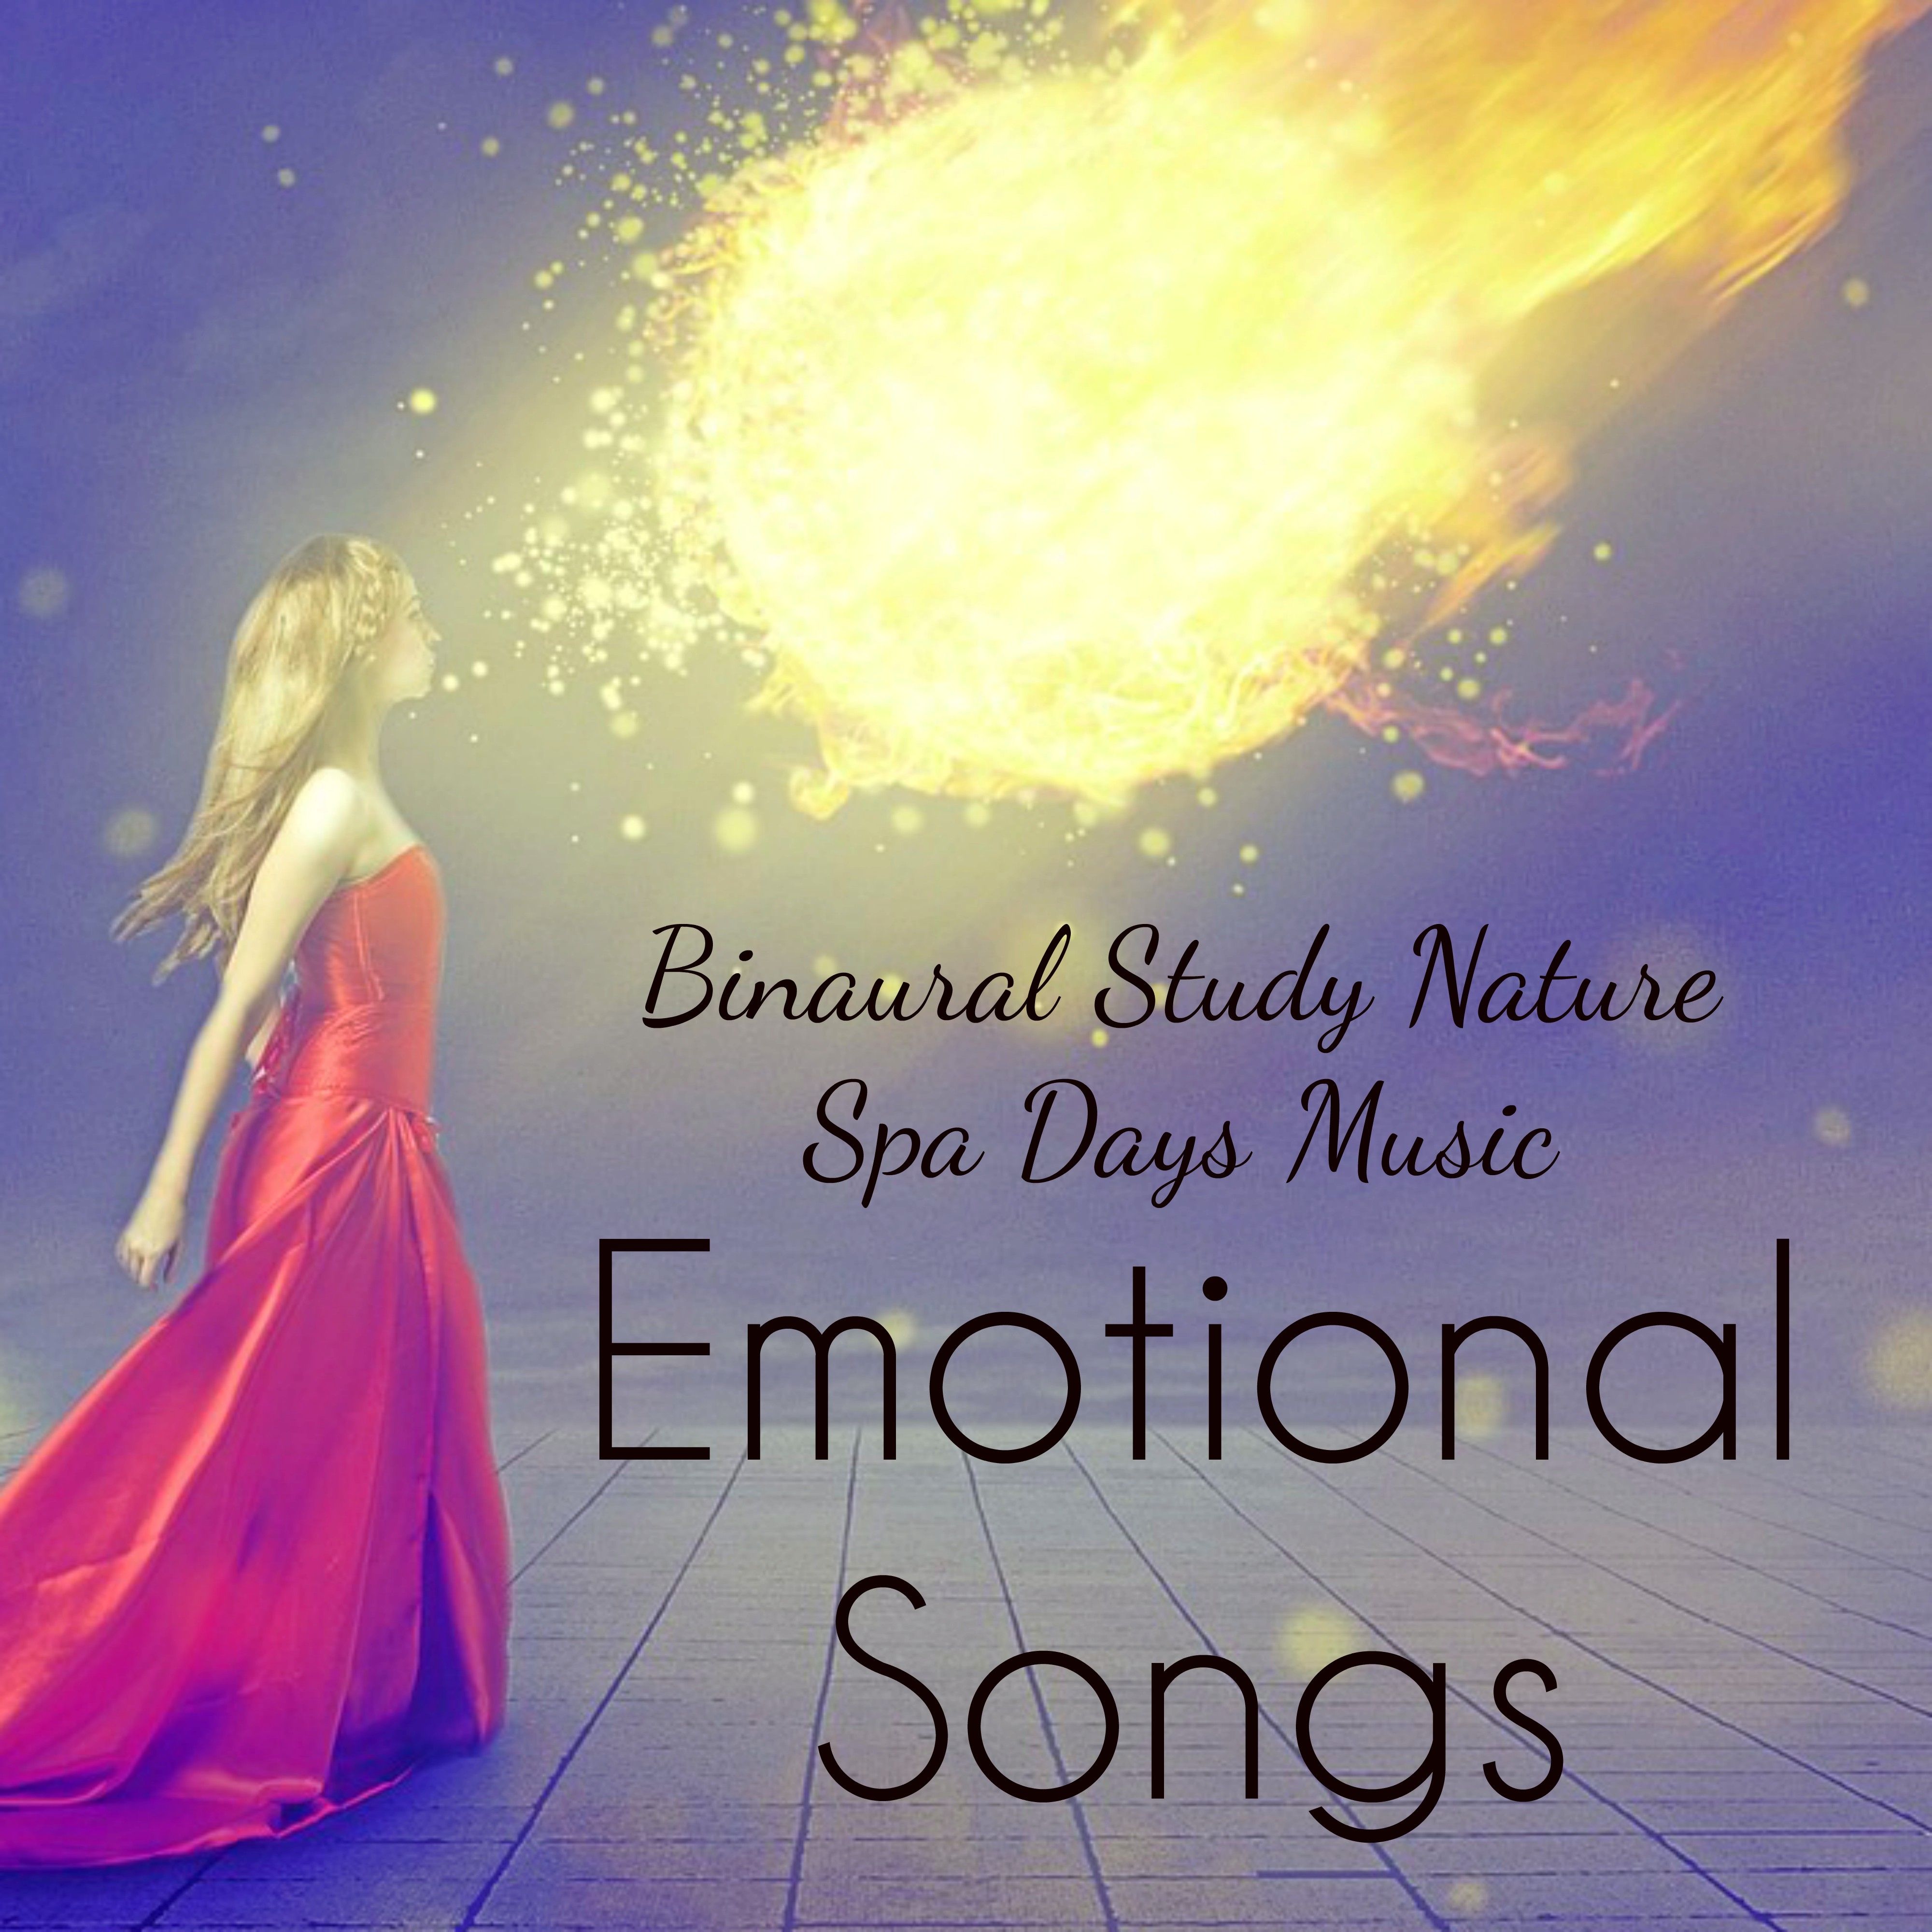 Emotional Songs - Binaural Study Nature Spa Days Music to Reduce Anxiety and Inner Peace